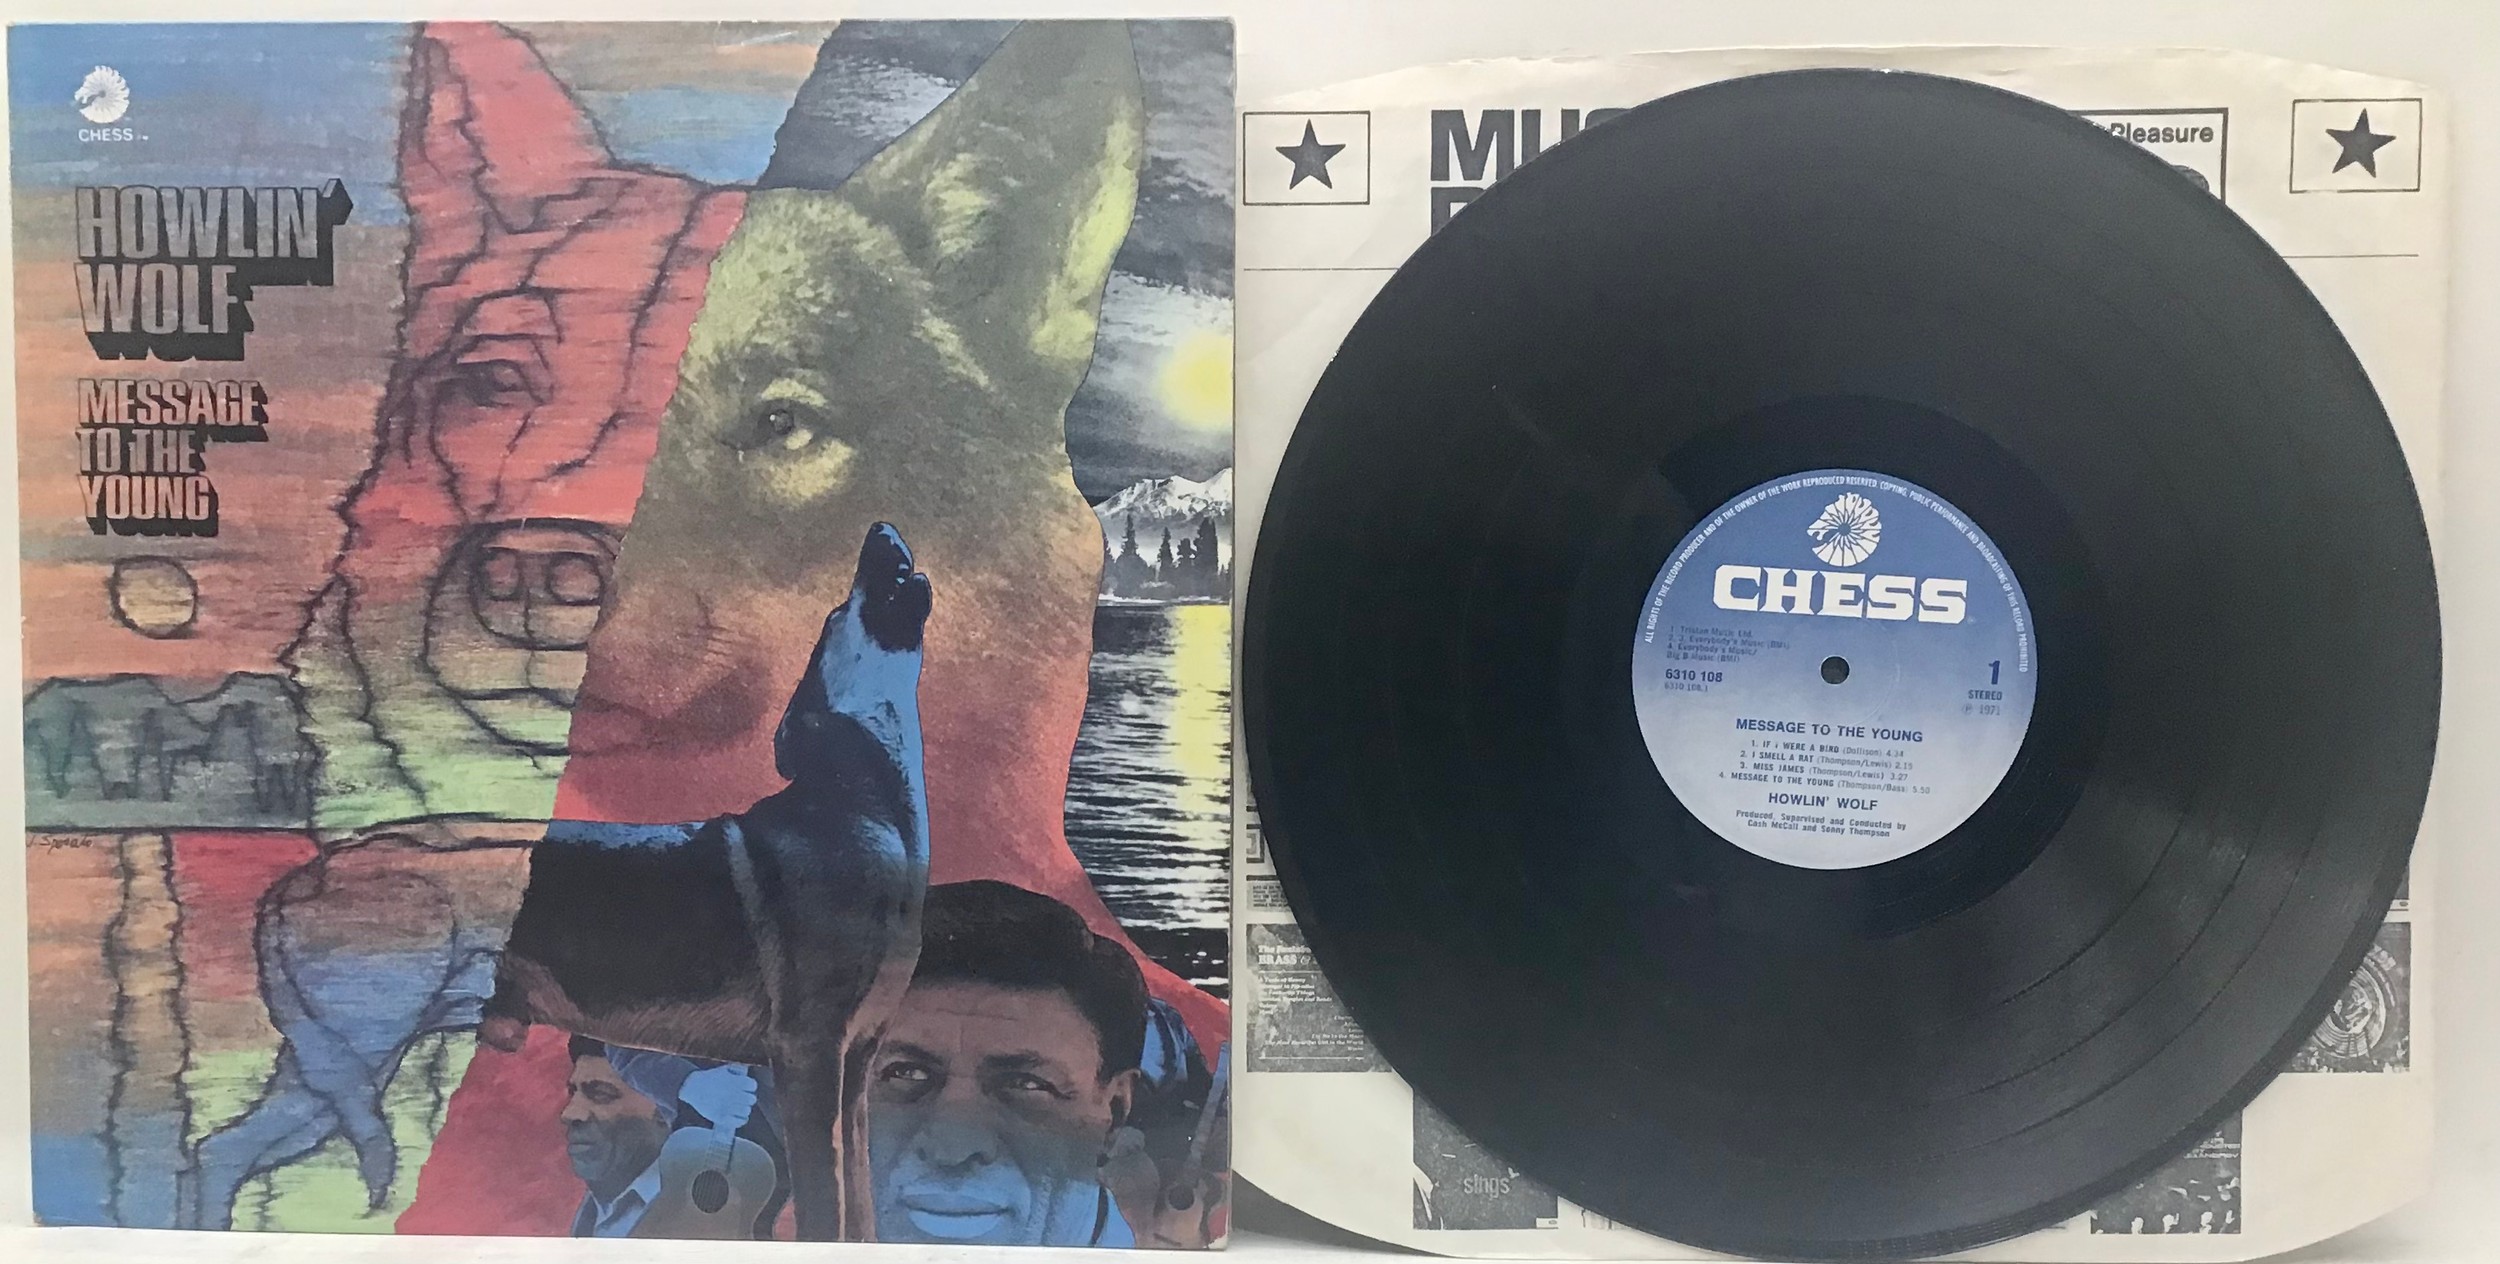 HOWLIN WOLF LP - MESSAGE TO THE YOUNG. Great release on Chess Records from 1971. Found here in Ex